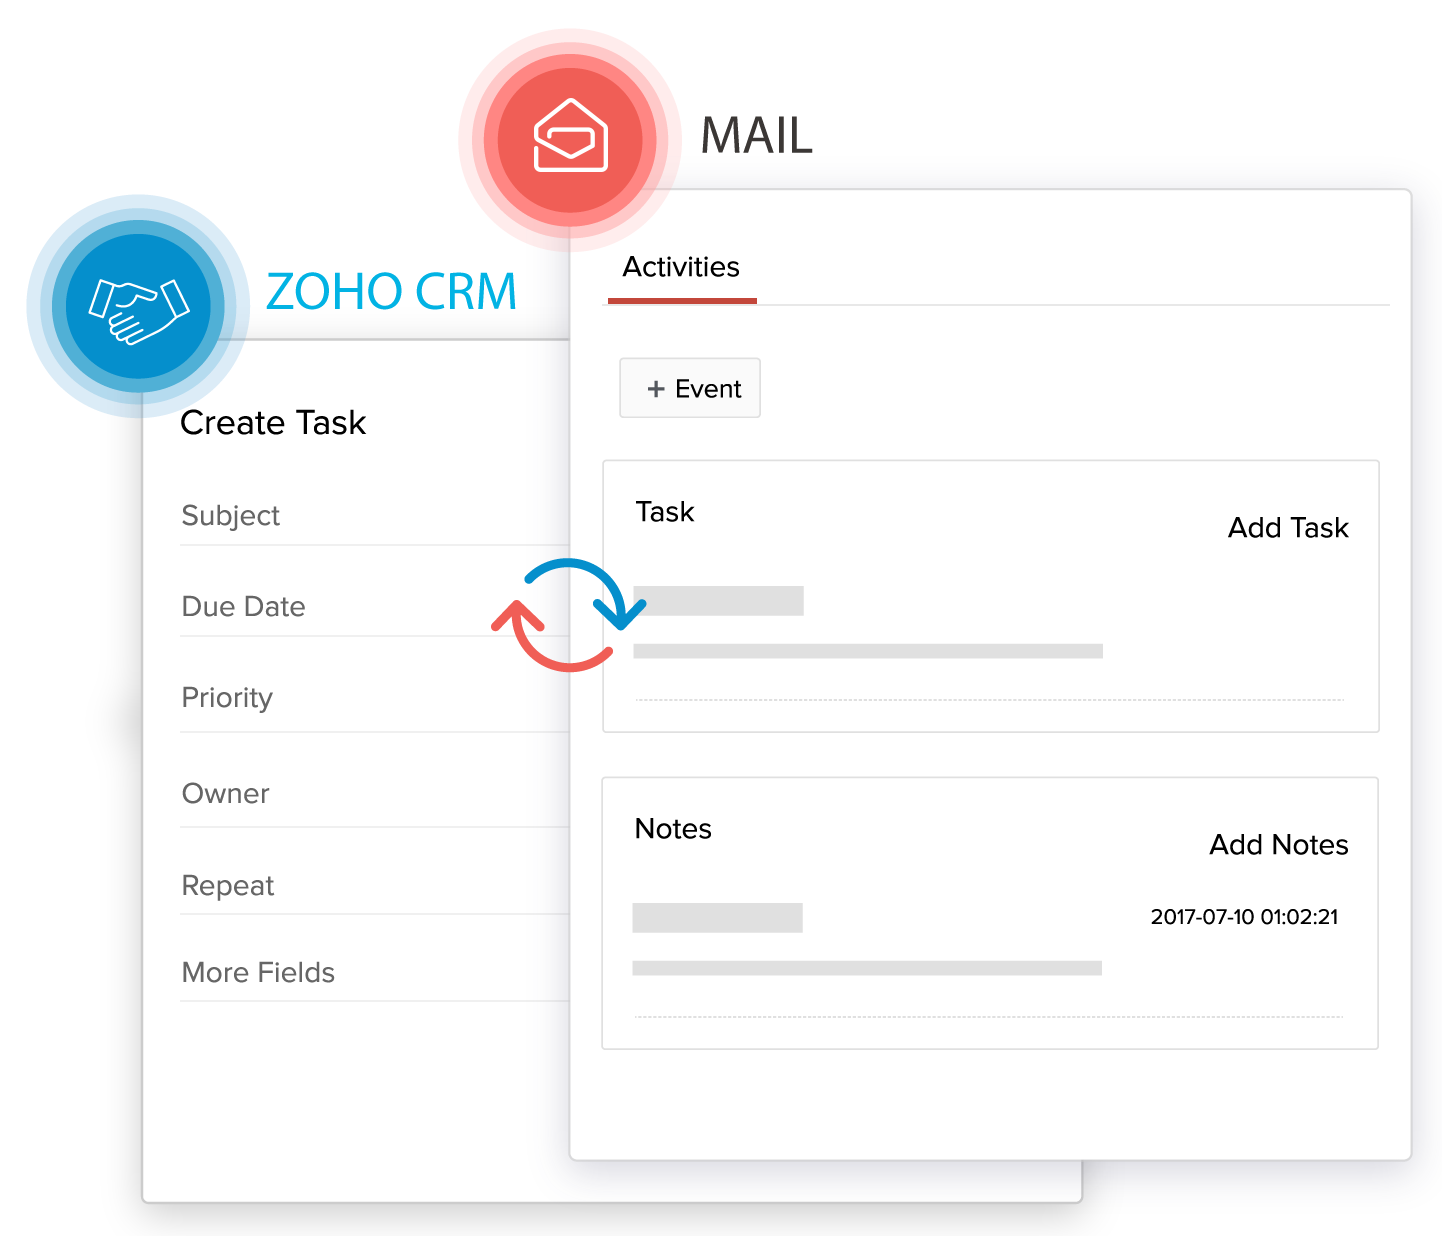 Email Integrated With CRM Software Zoho Mail